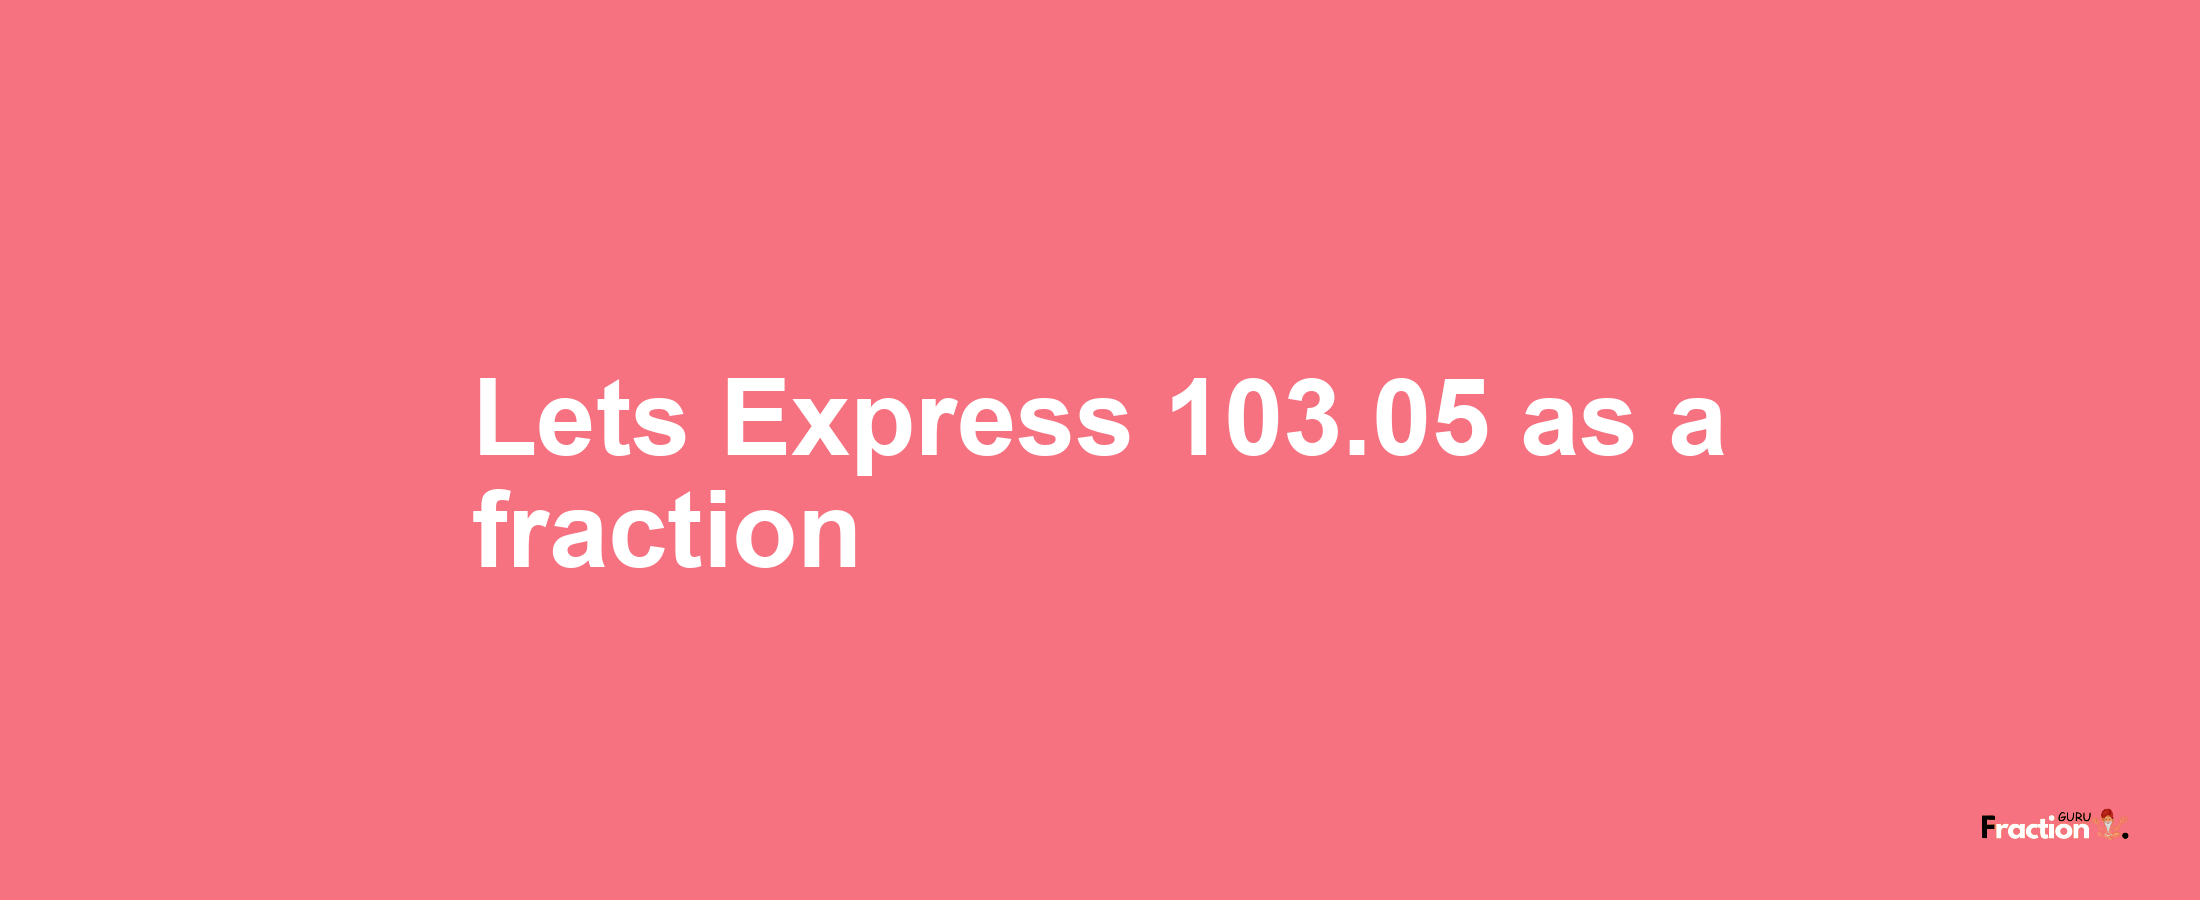 Lets Express 103.05 as afraction